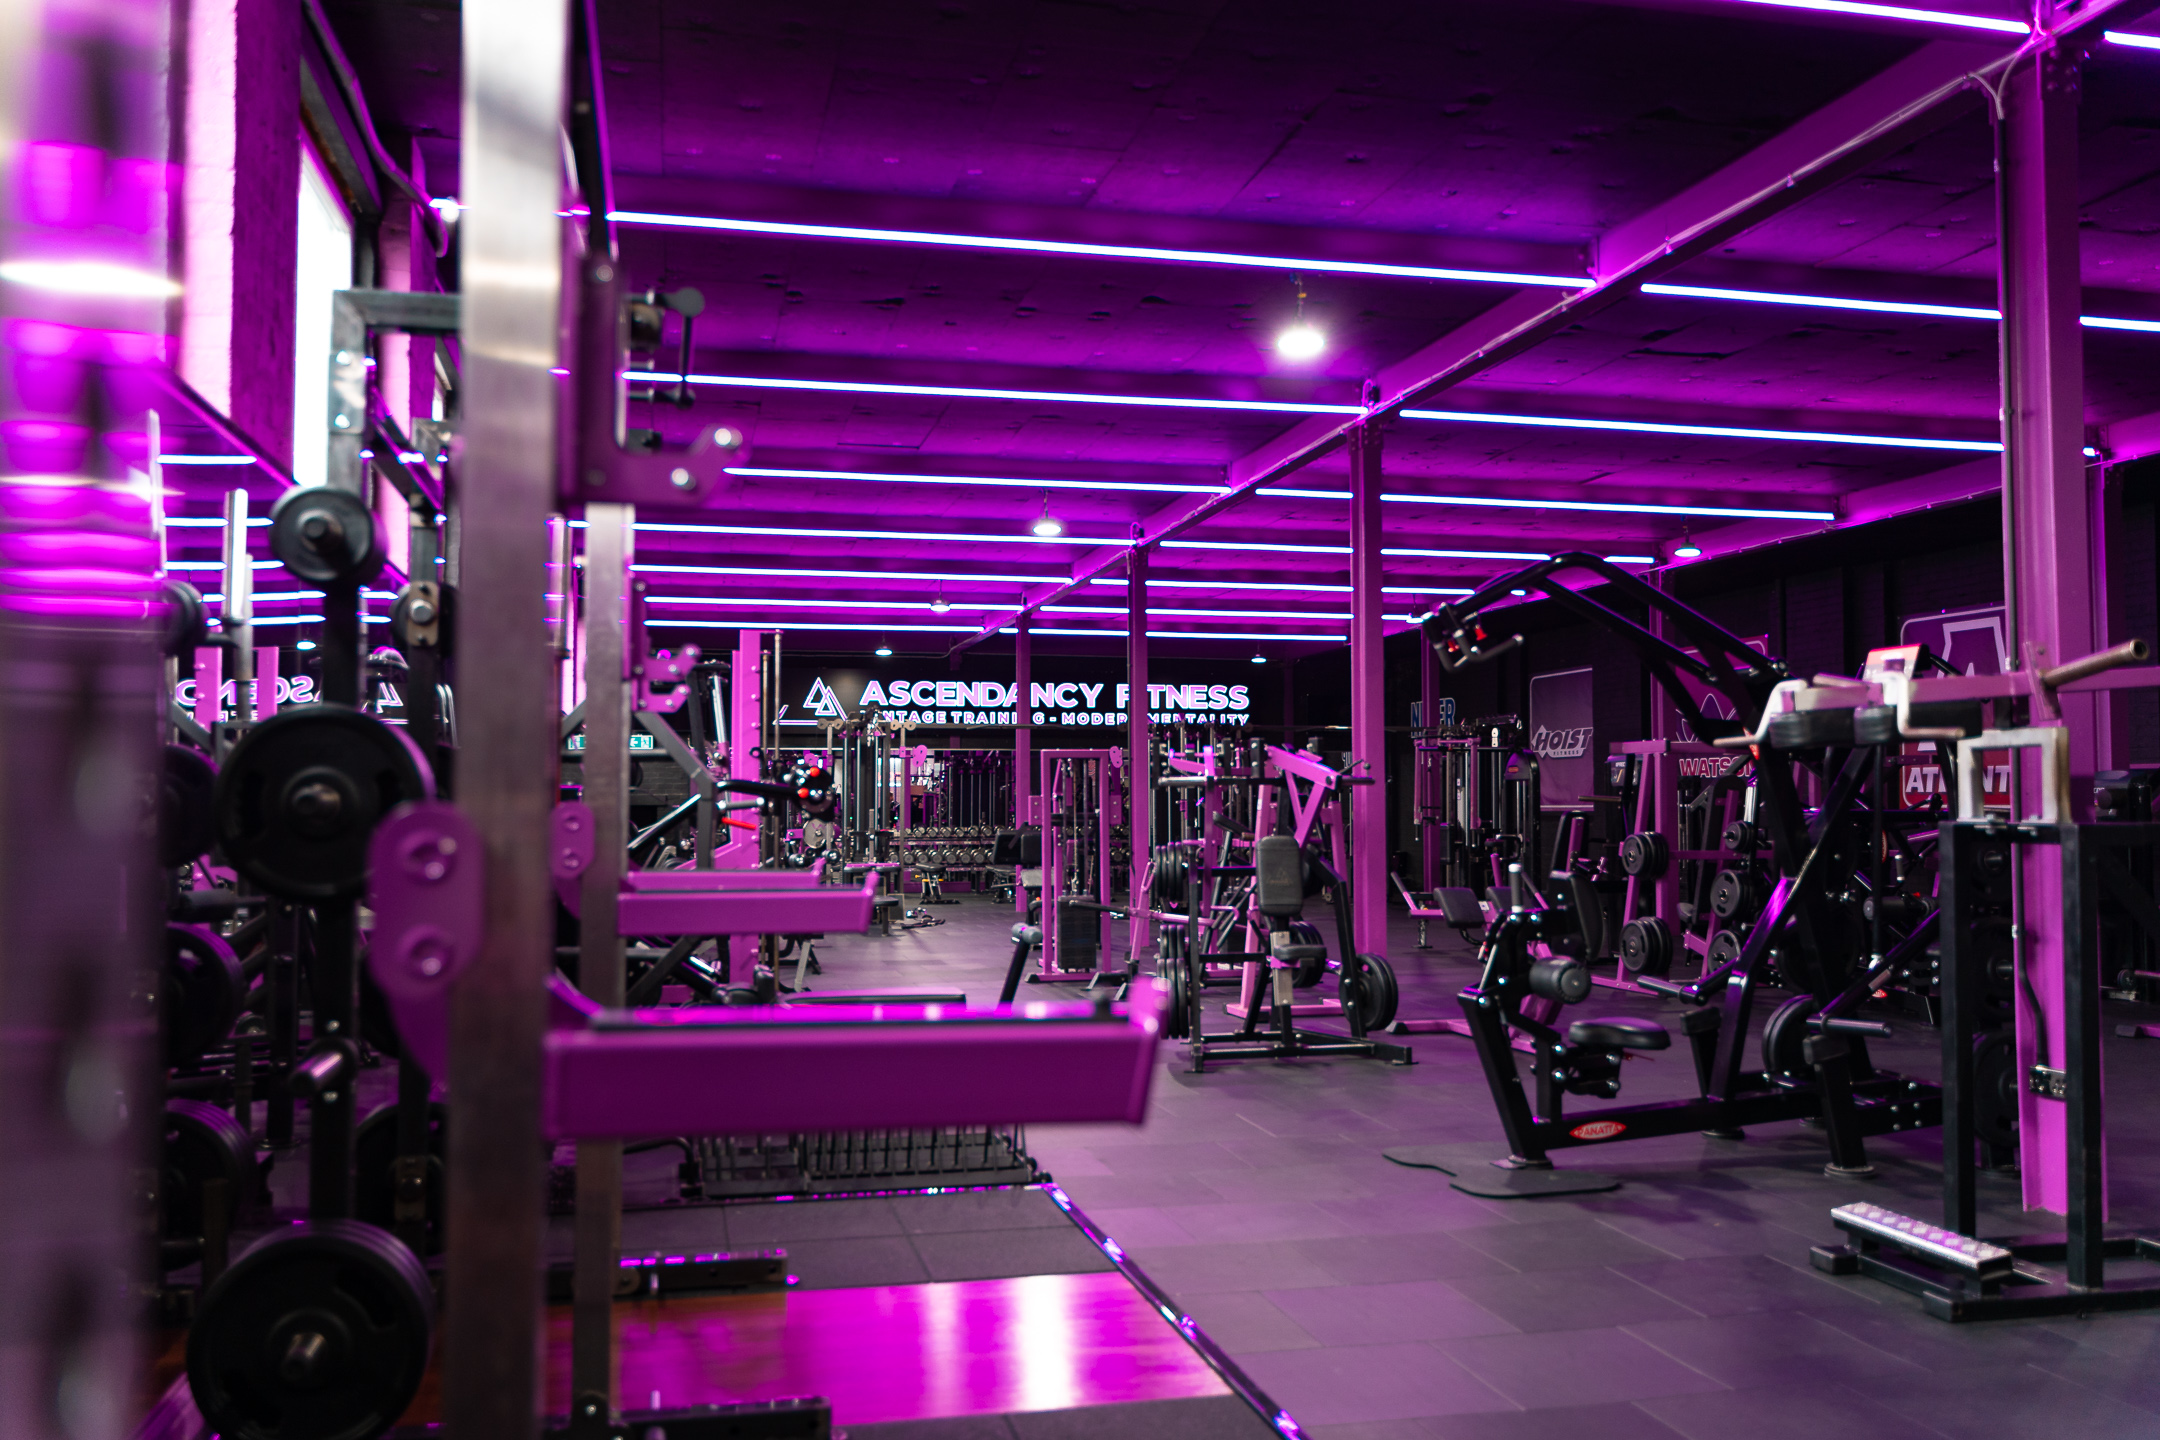 Ascendancy Fitness expansion opens making it Warrington’s largest independent gym